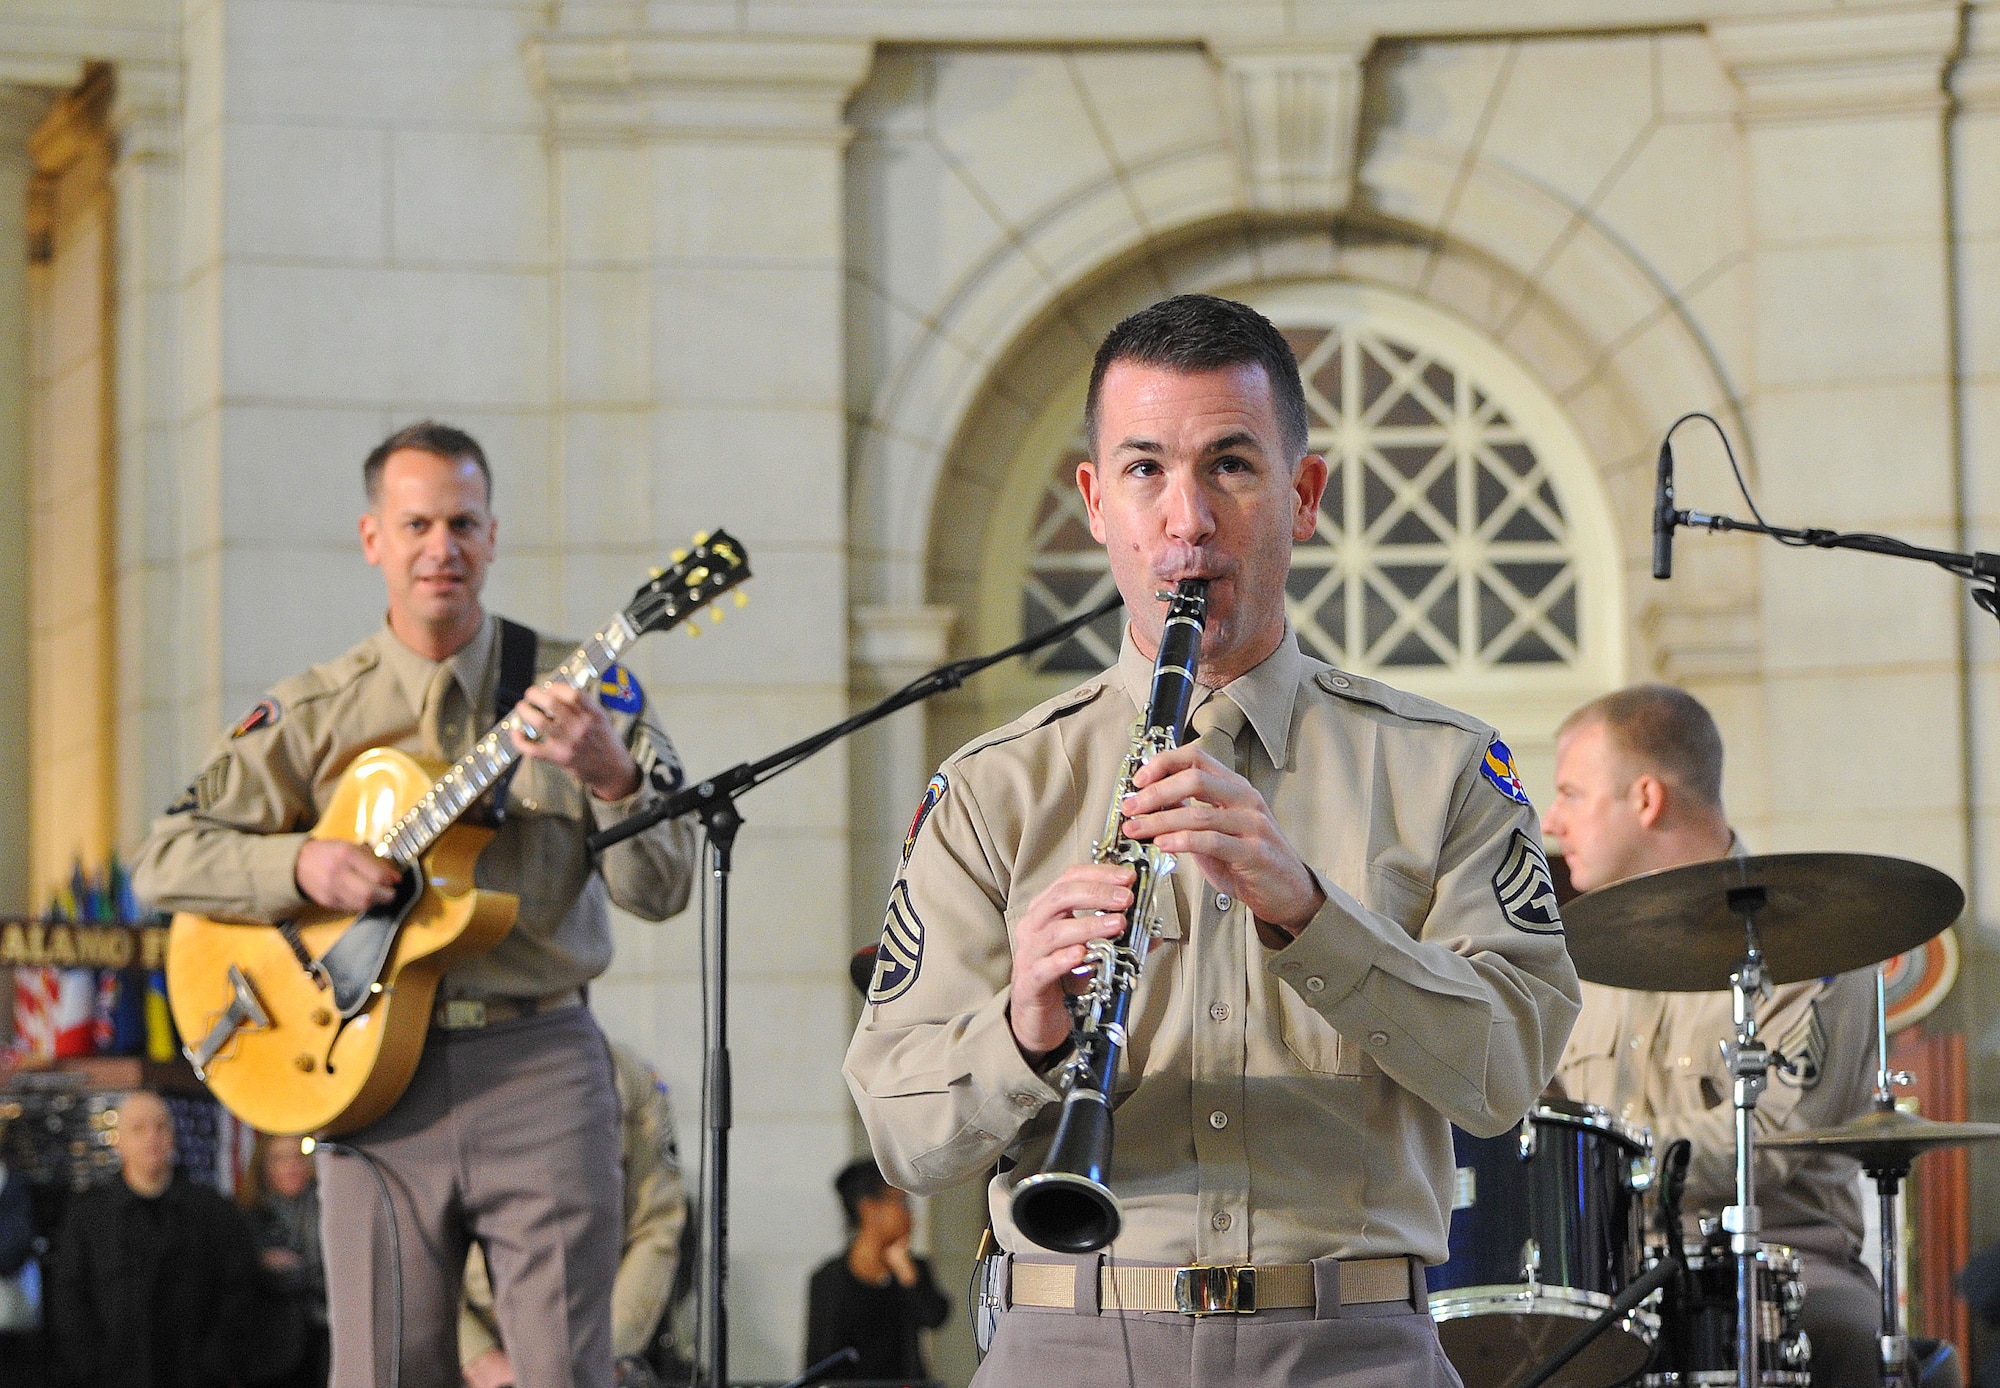 Master Sgt. Tyler Kuebler, a clarinetist with the Airmen of Note, performs for an impromptu crown at Union Station. The United States Air Force Band surprised commuters at Union Station with a World War II Holiday Flashback Dec. 3, 2015. The event was designed to be a special holiday musical presentation celebrating the service and sacrifices of our nation’s World War II veterans.